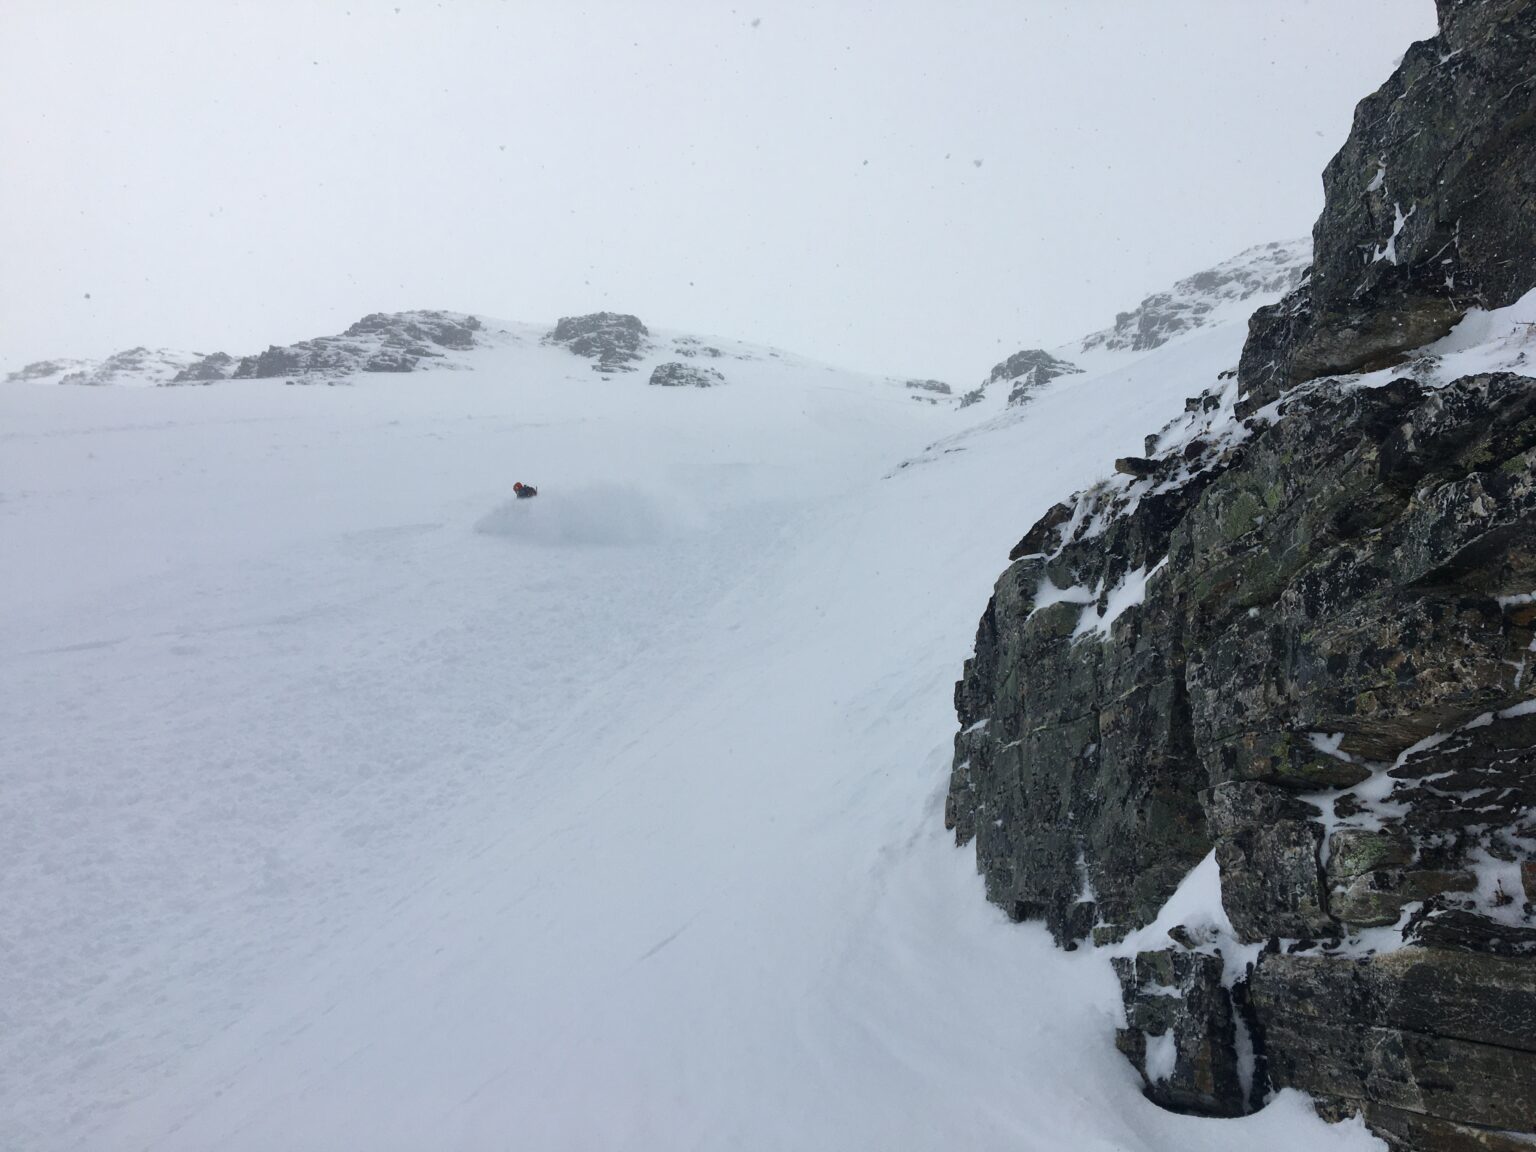 Snowboarding down the West Chute of Sjufjellet in powder conditions